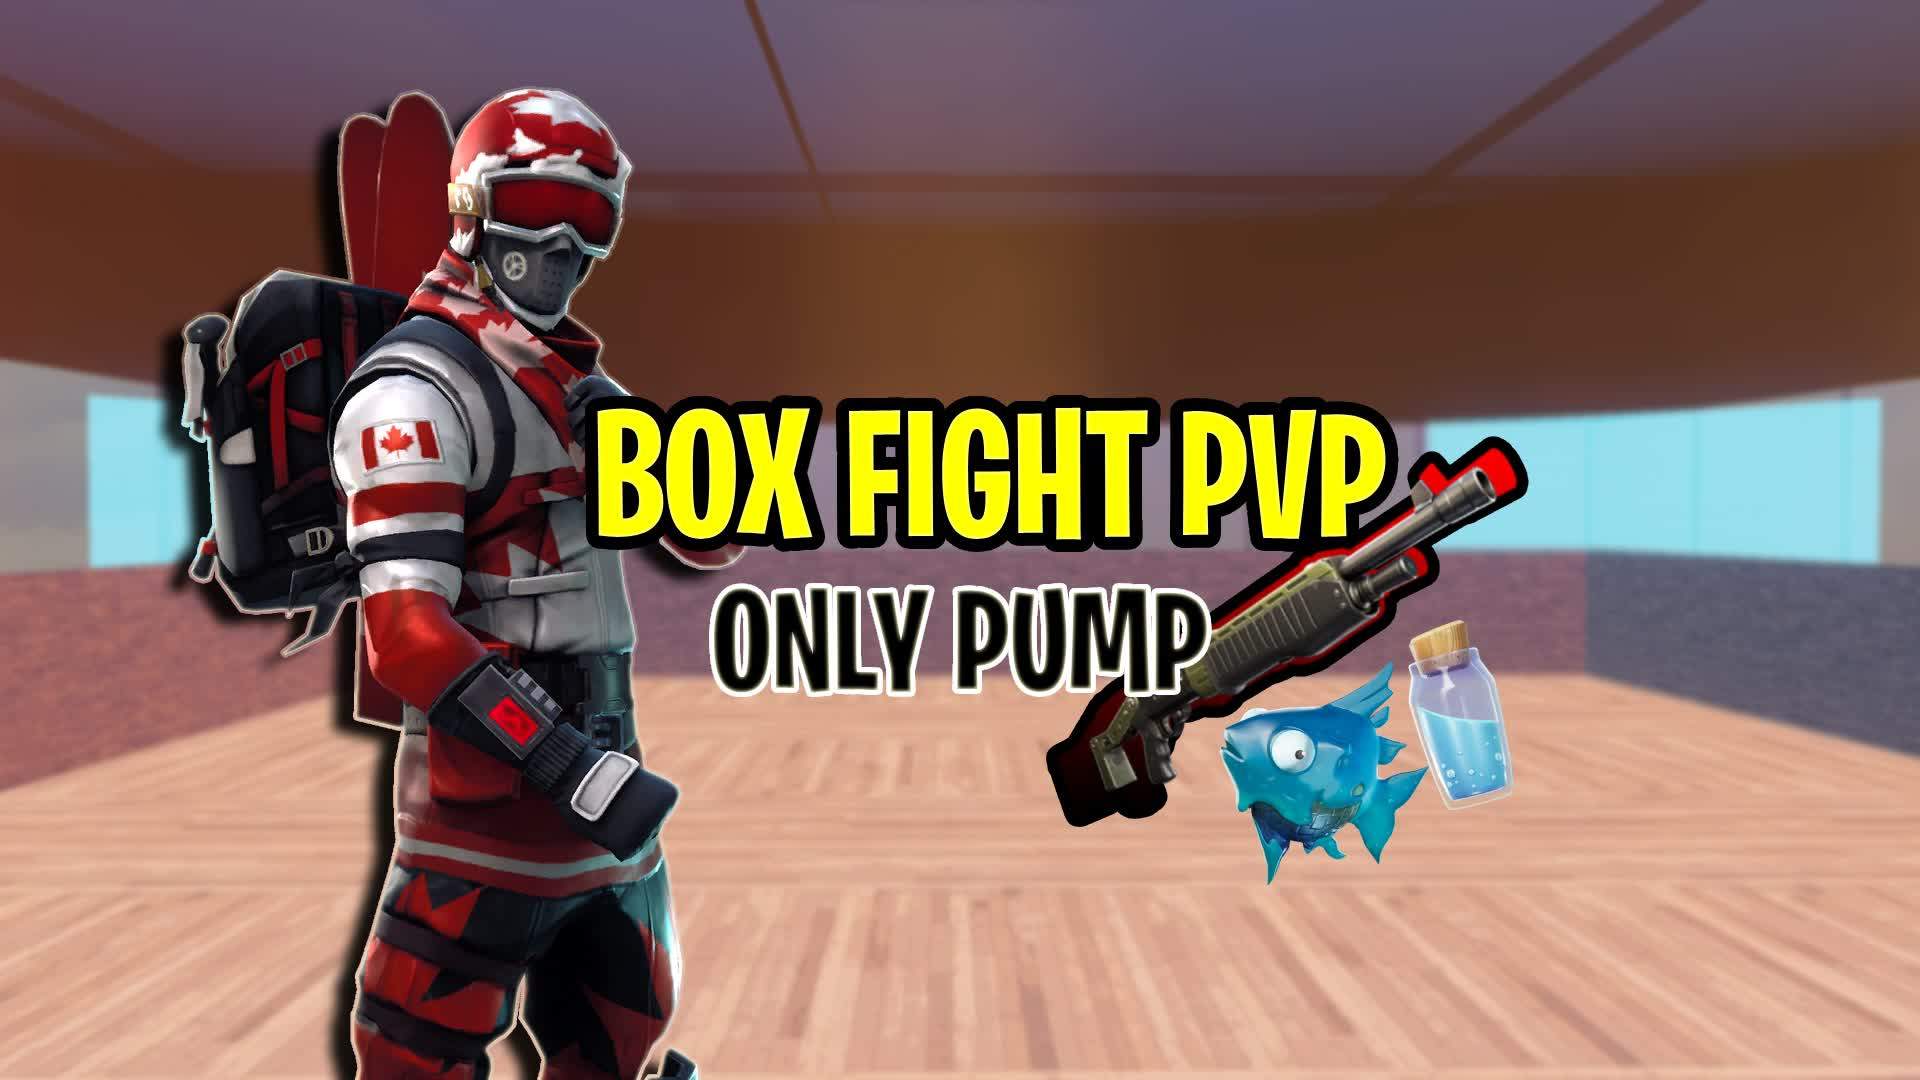 Box Fight PVP only pump